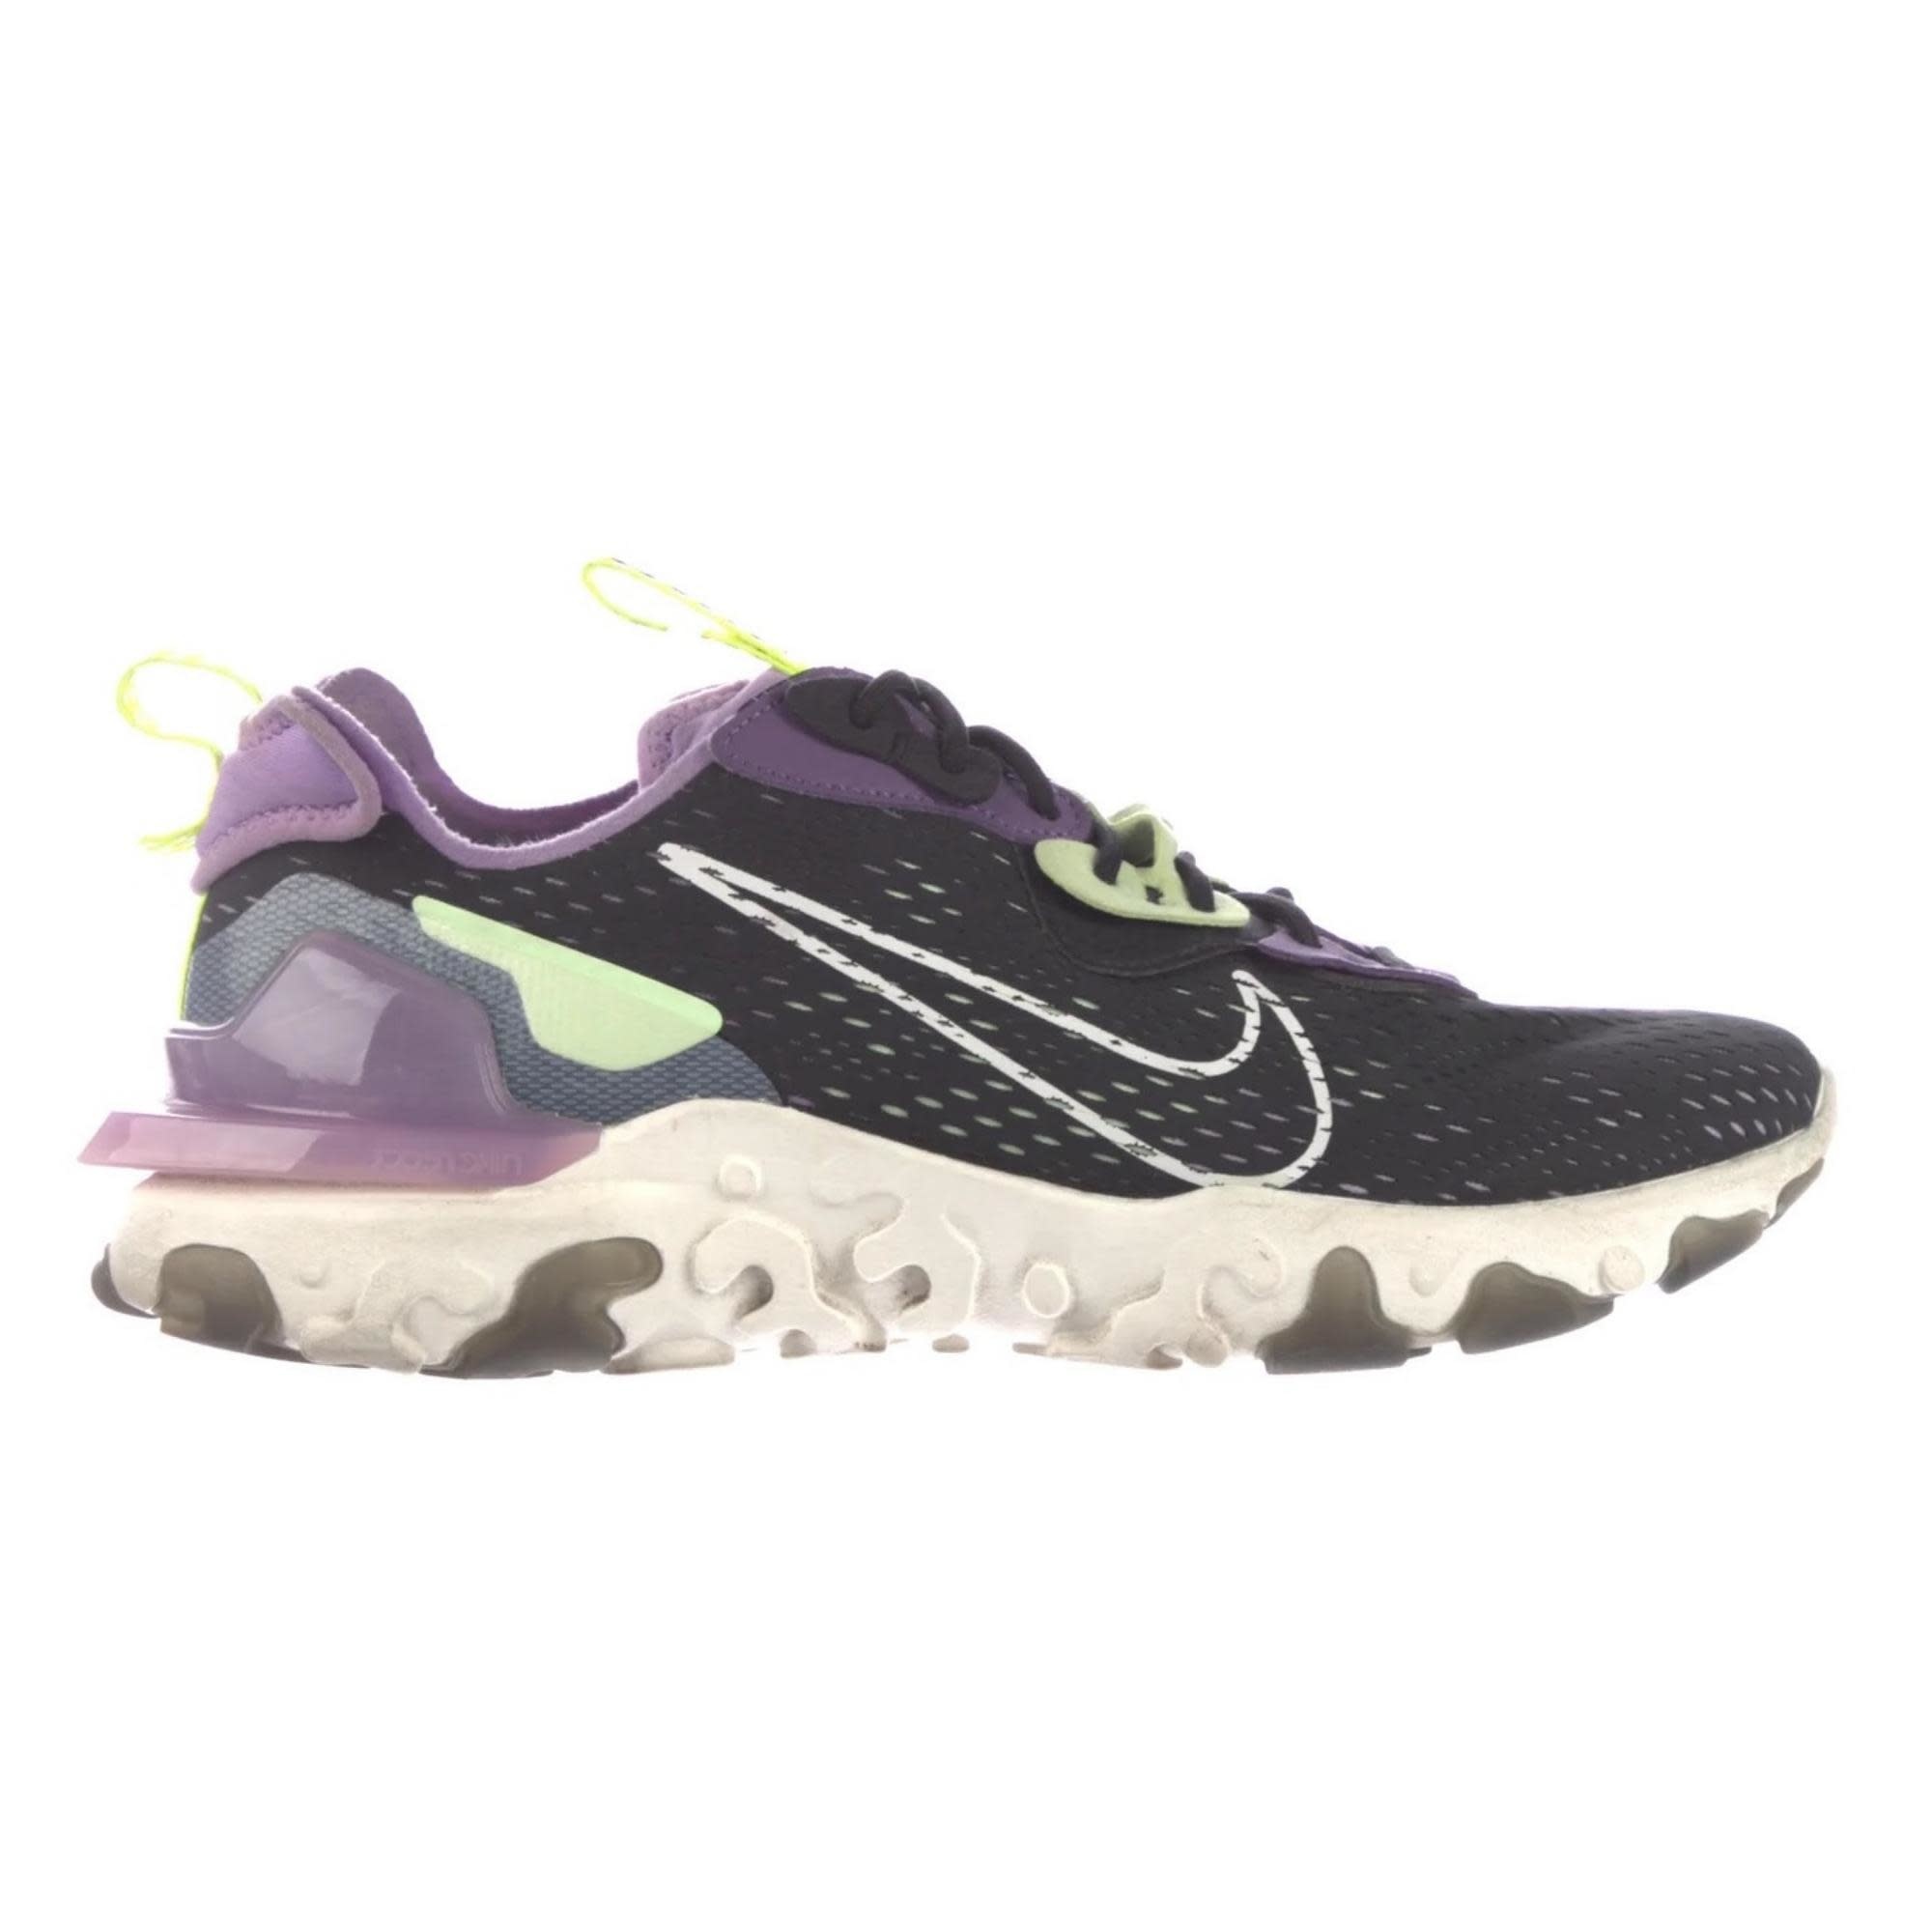 NIKE BLACK/PURPLE LEATHER AND FABRIC REACT VISION SNEAKERS (11 US)